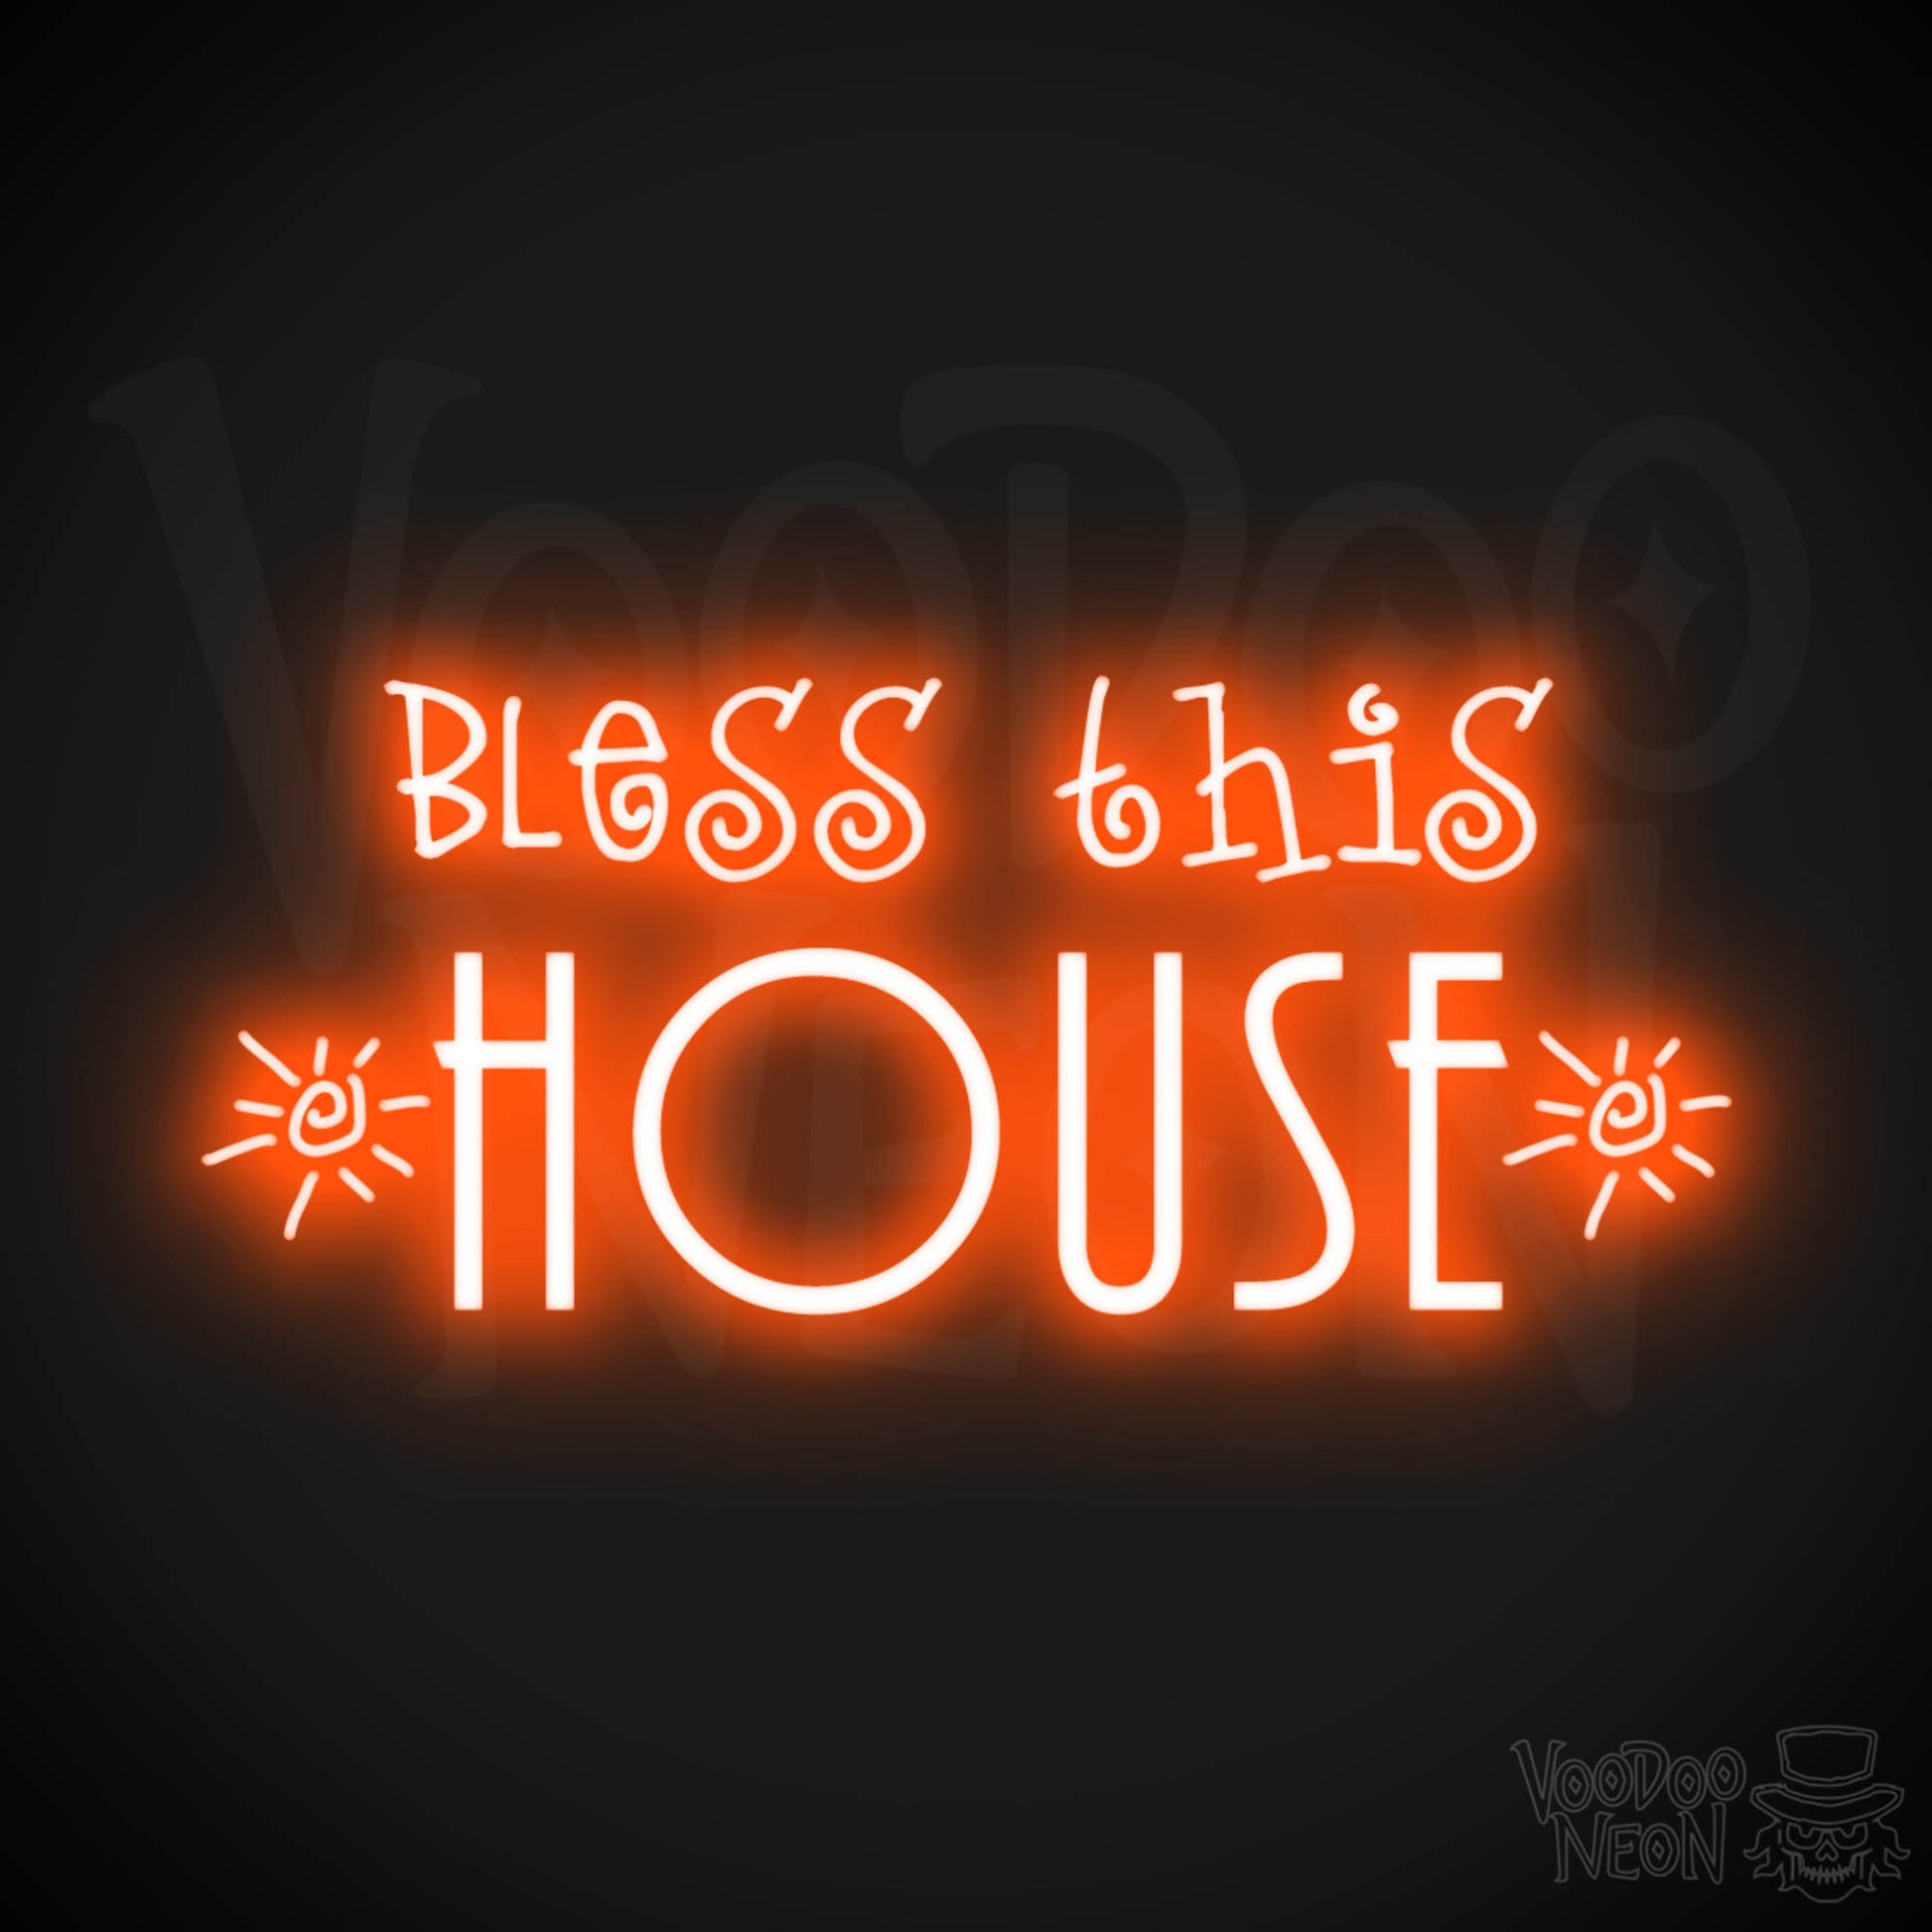 Bless This House Neon Sign - Neon Bless This House Sign - LED Light Up Sign - Color Orange